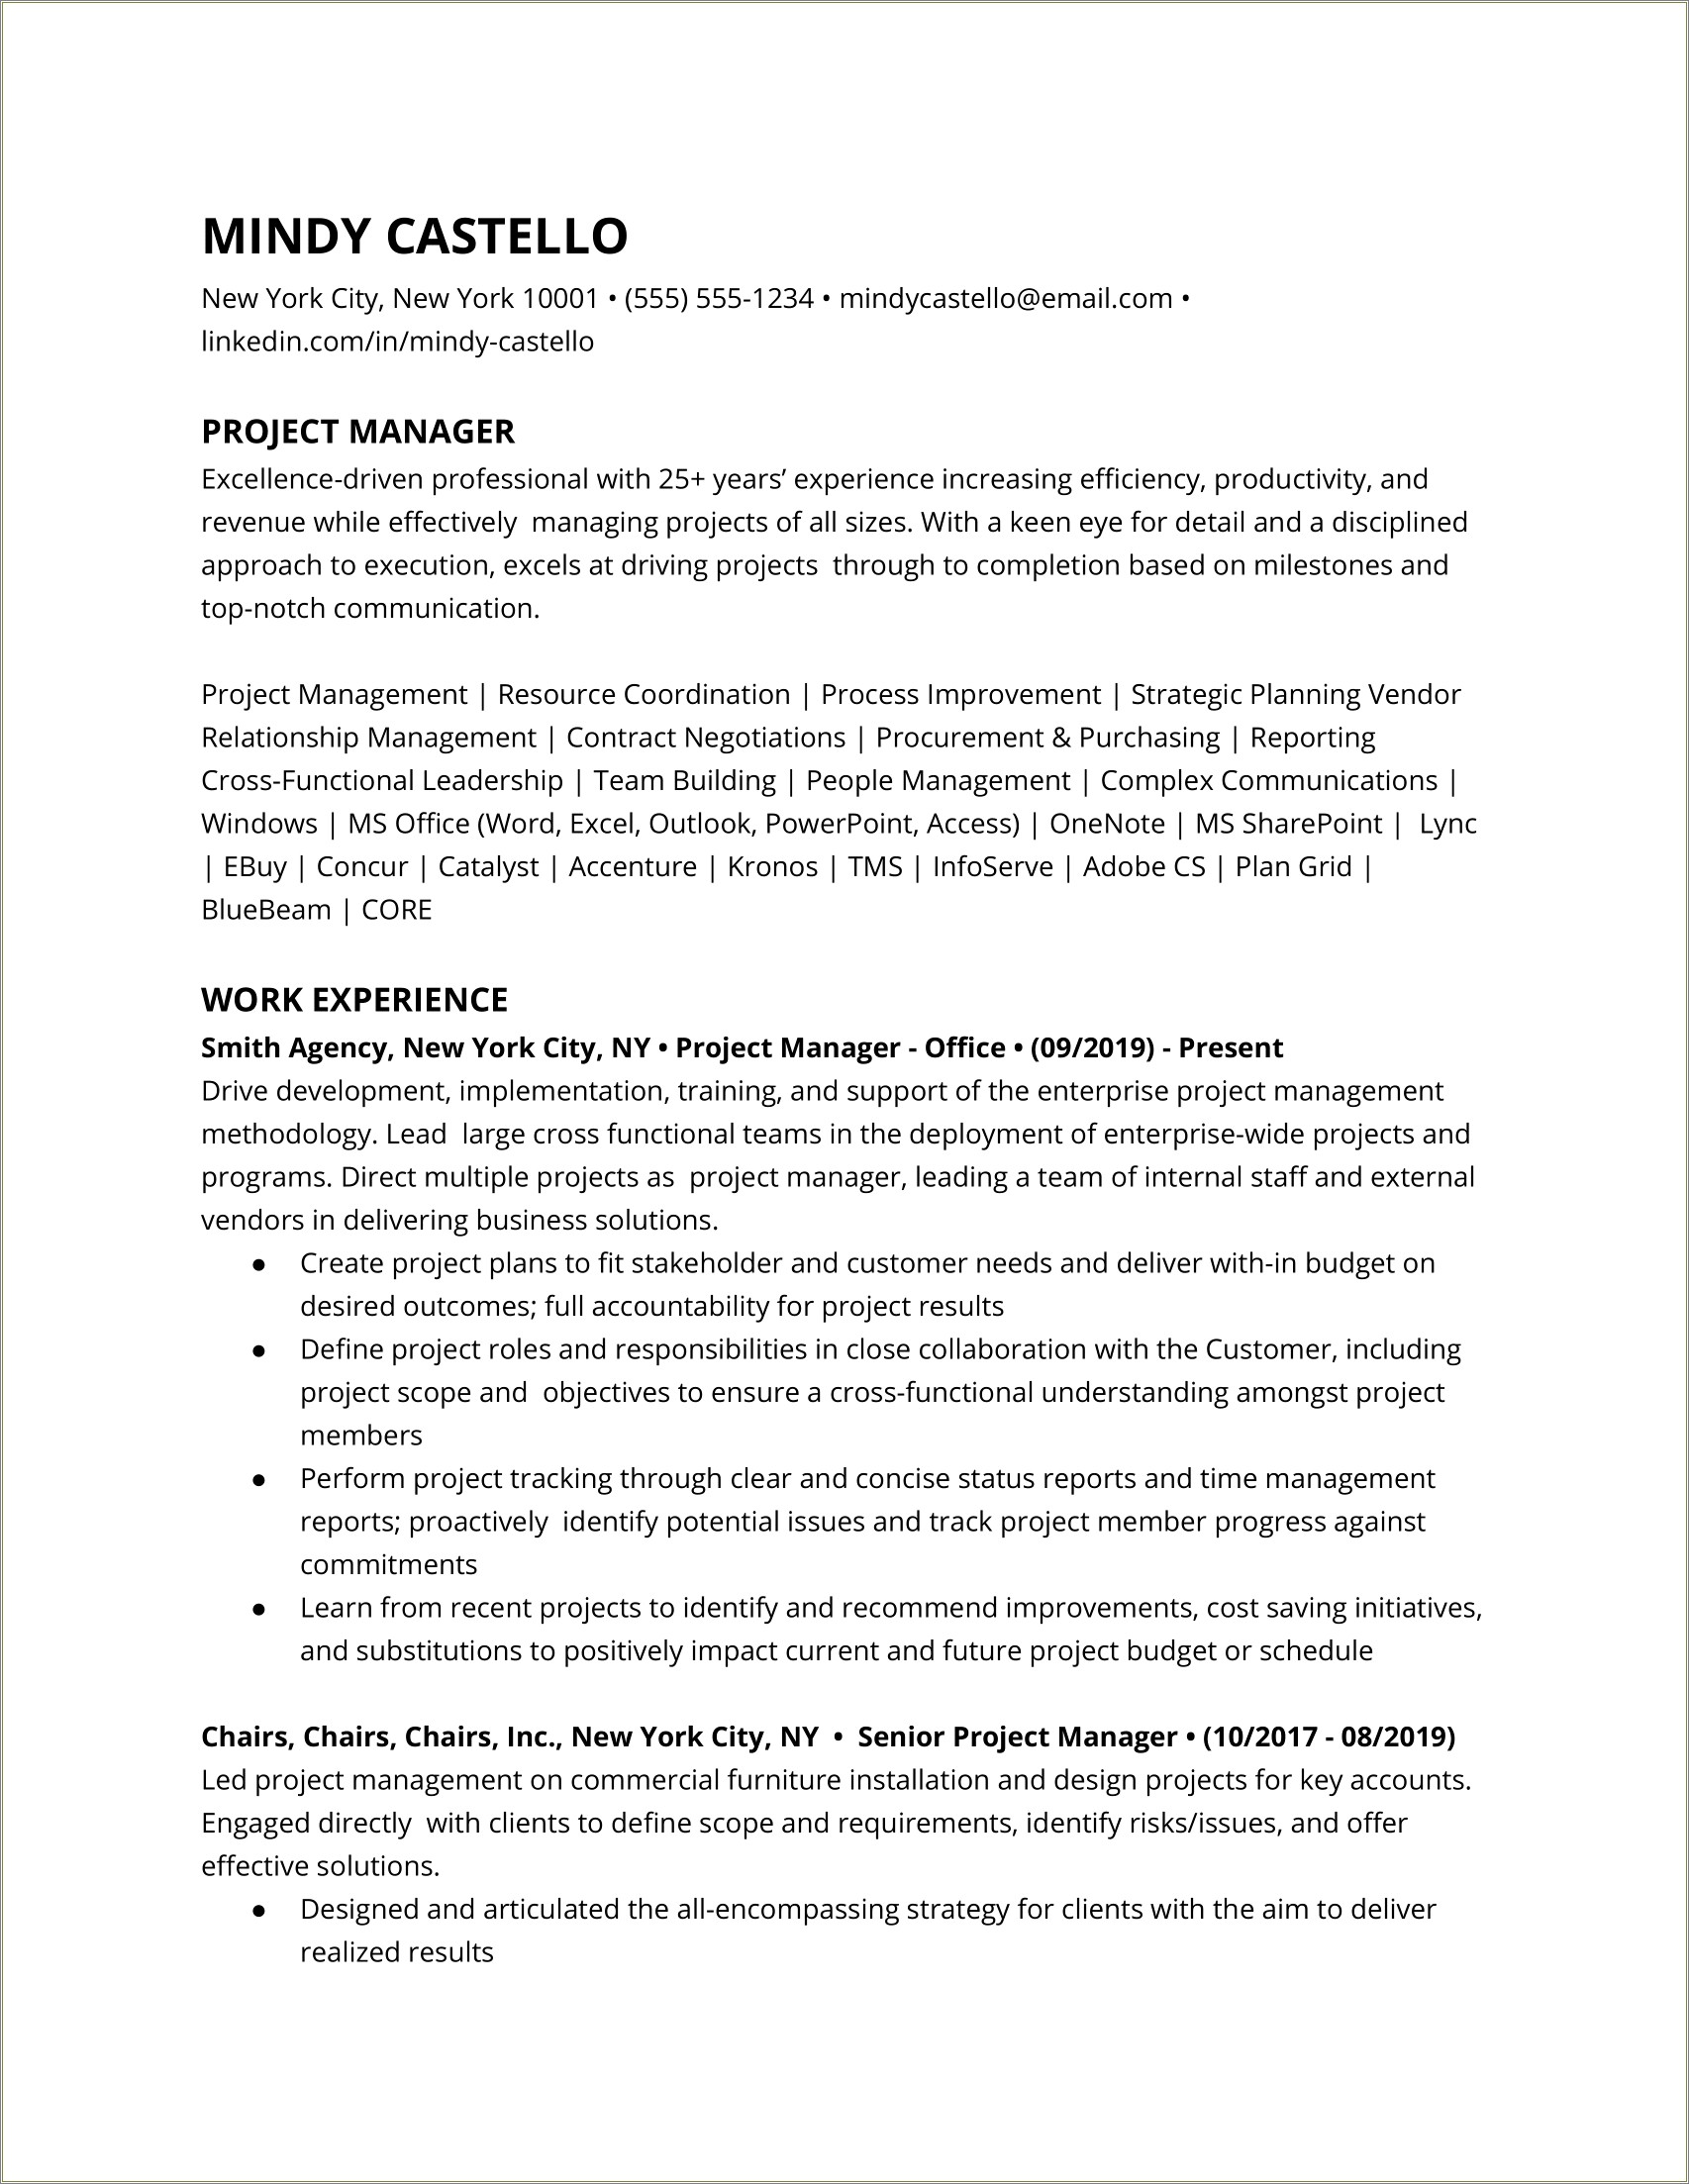 Resume Objective For Construciton Project Coordinator